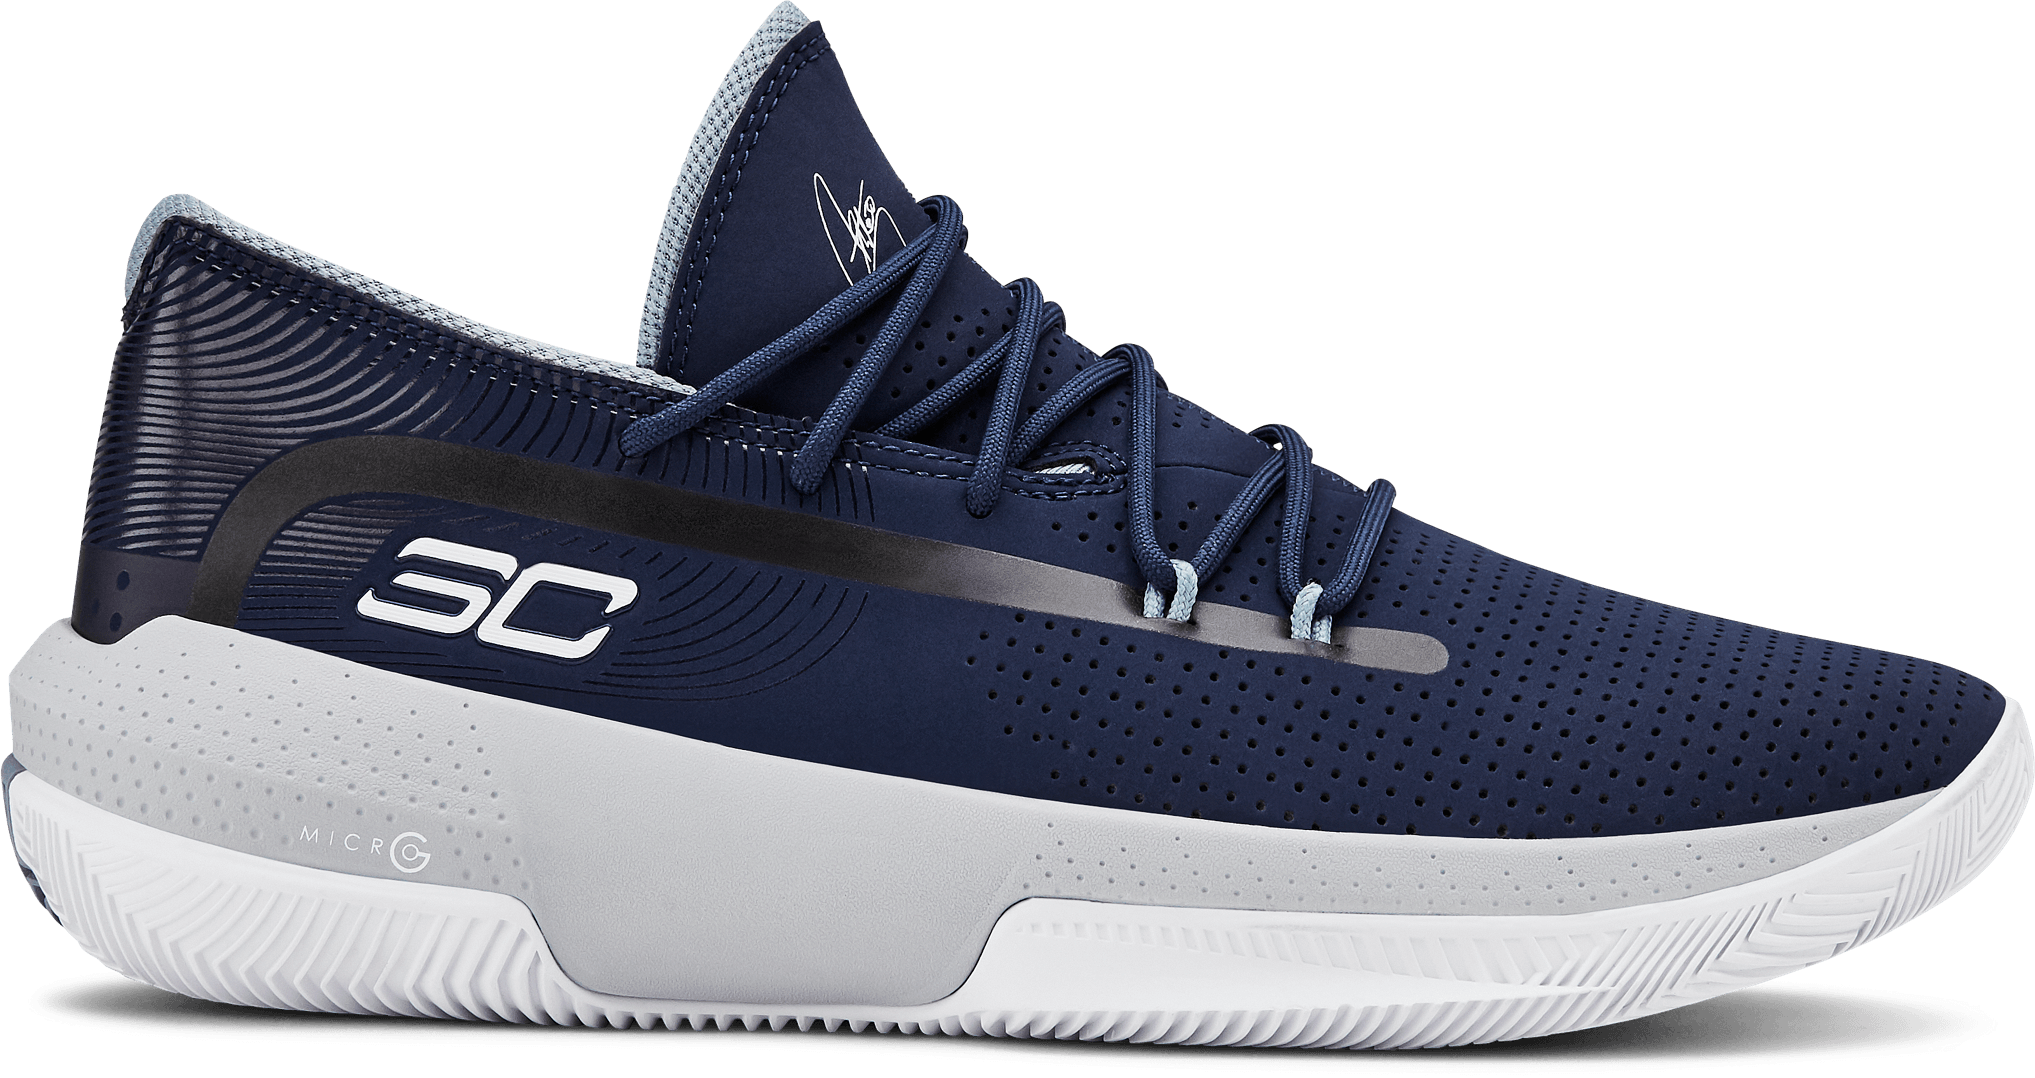 Under Armour Curry 3Zero 3 - Review, Deals, Pics of 13 Colorways